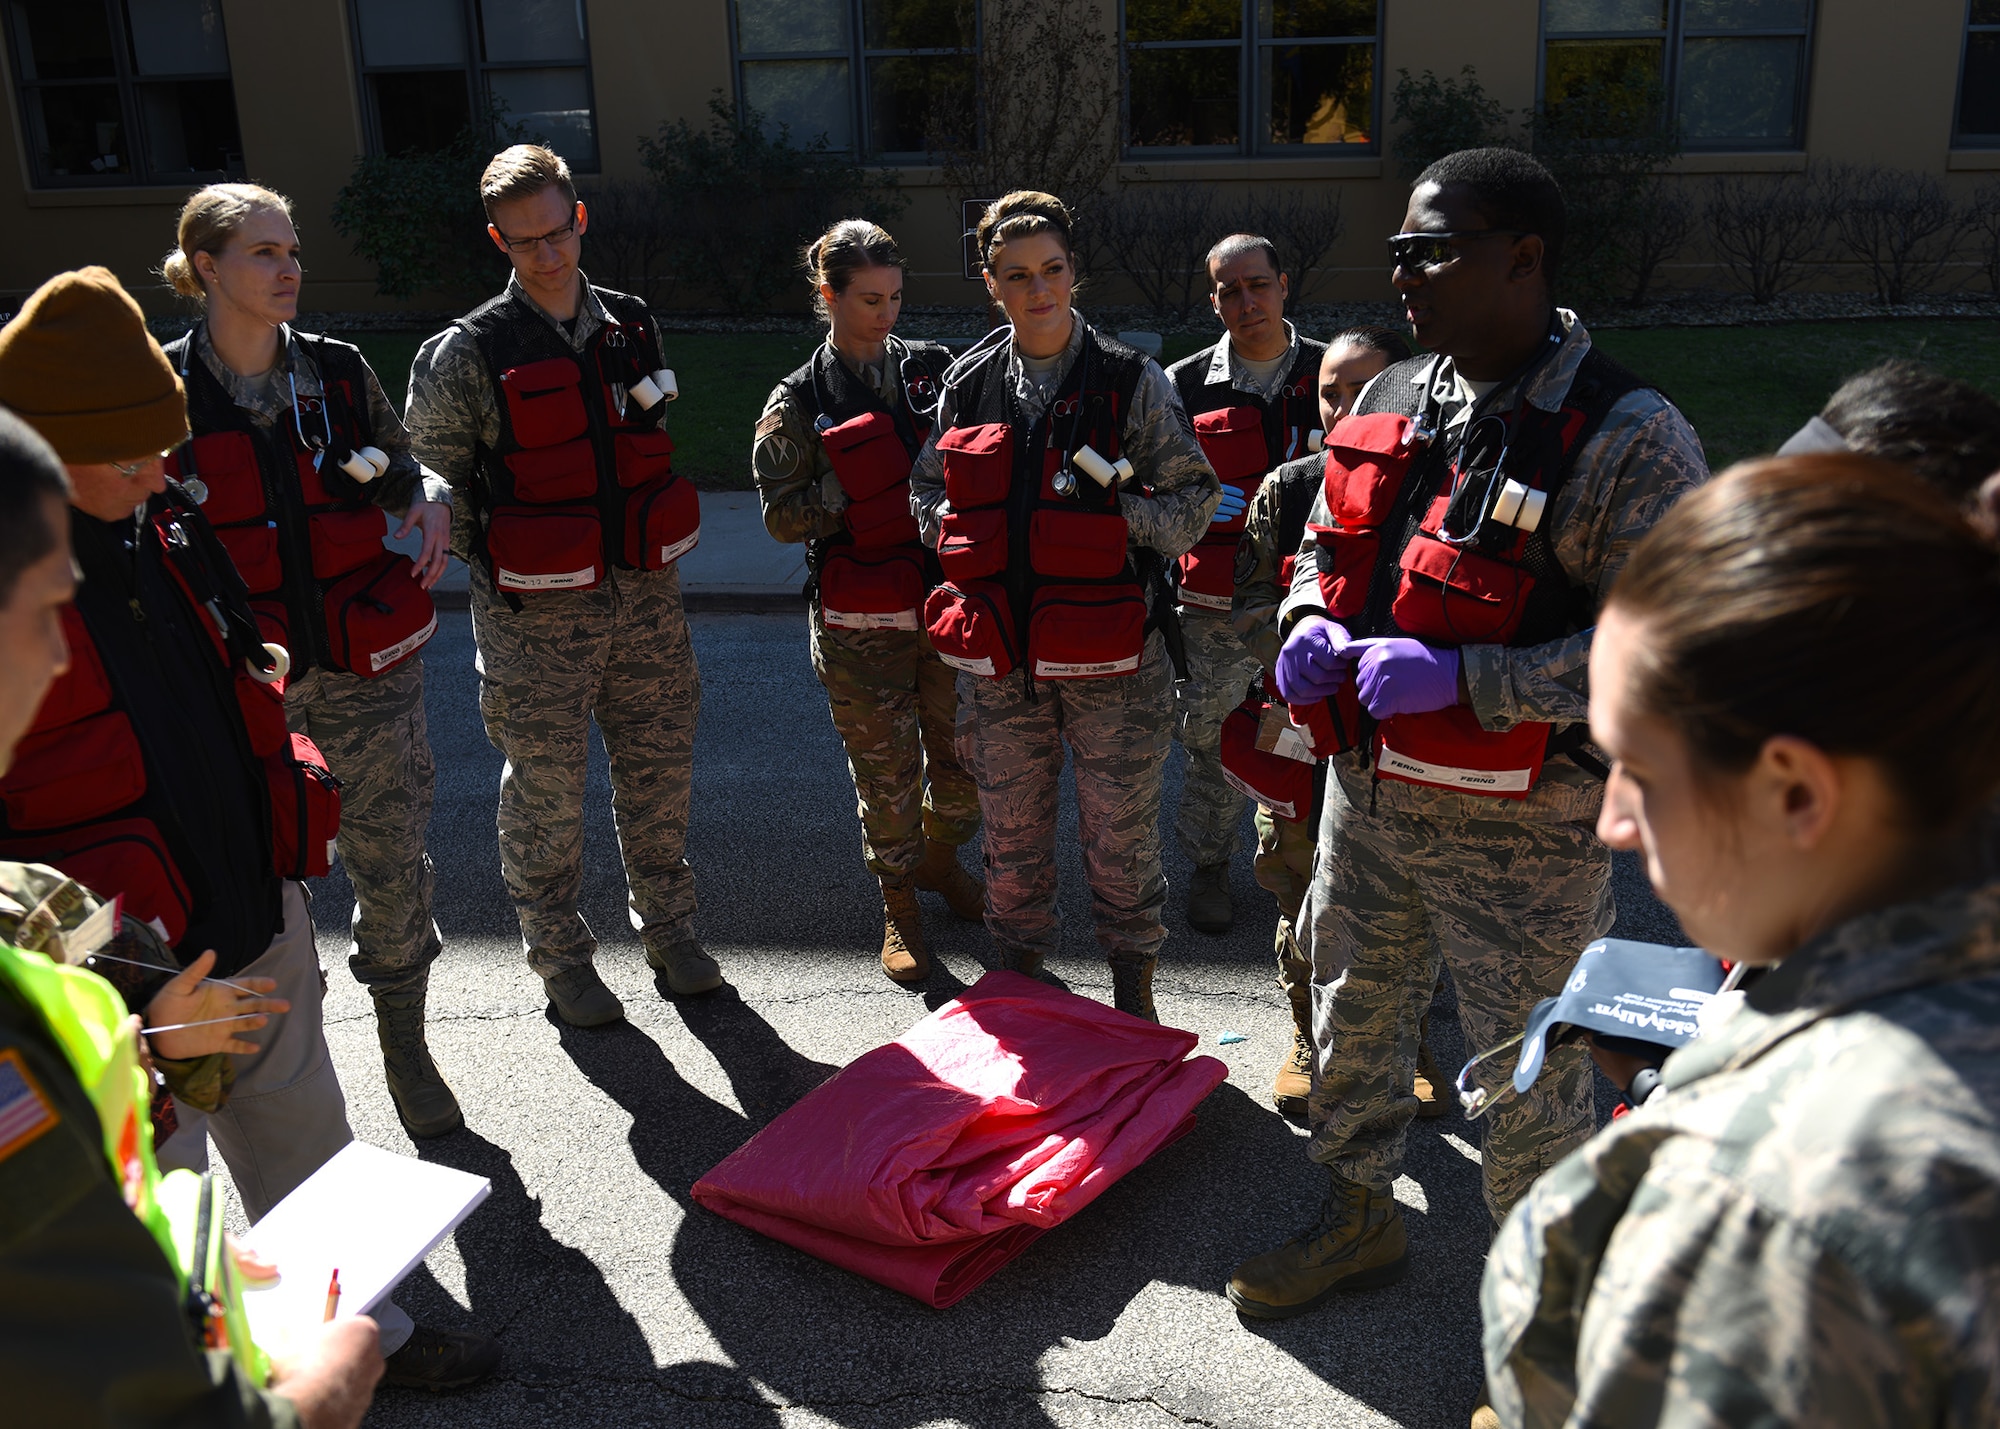 Airmen assigned to the 7th Operational Medical Readiness Squadron huddle to discuss the 7th Medical Group’s chemical, biological, radiological, and nuclear exercise at Dyess Air Force Base, Texas, March 6, 2020.